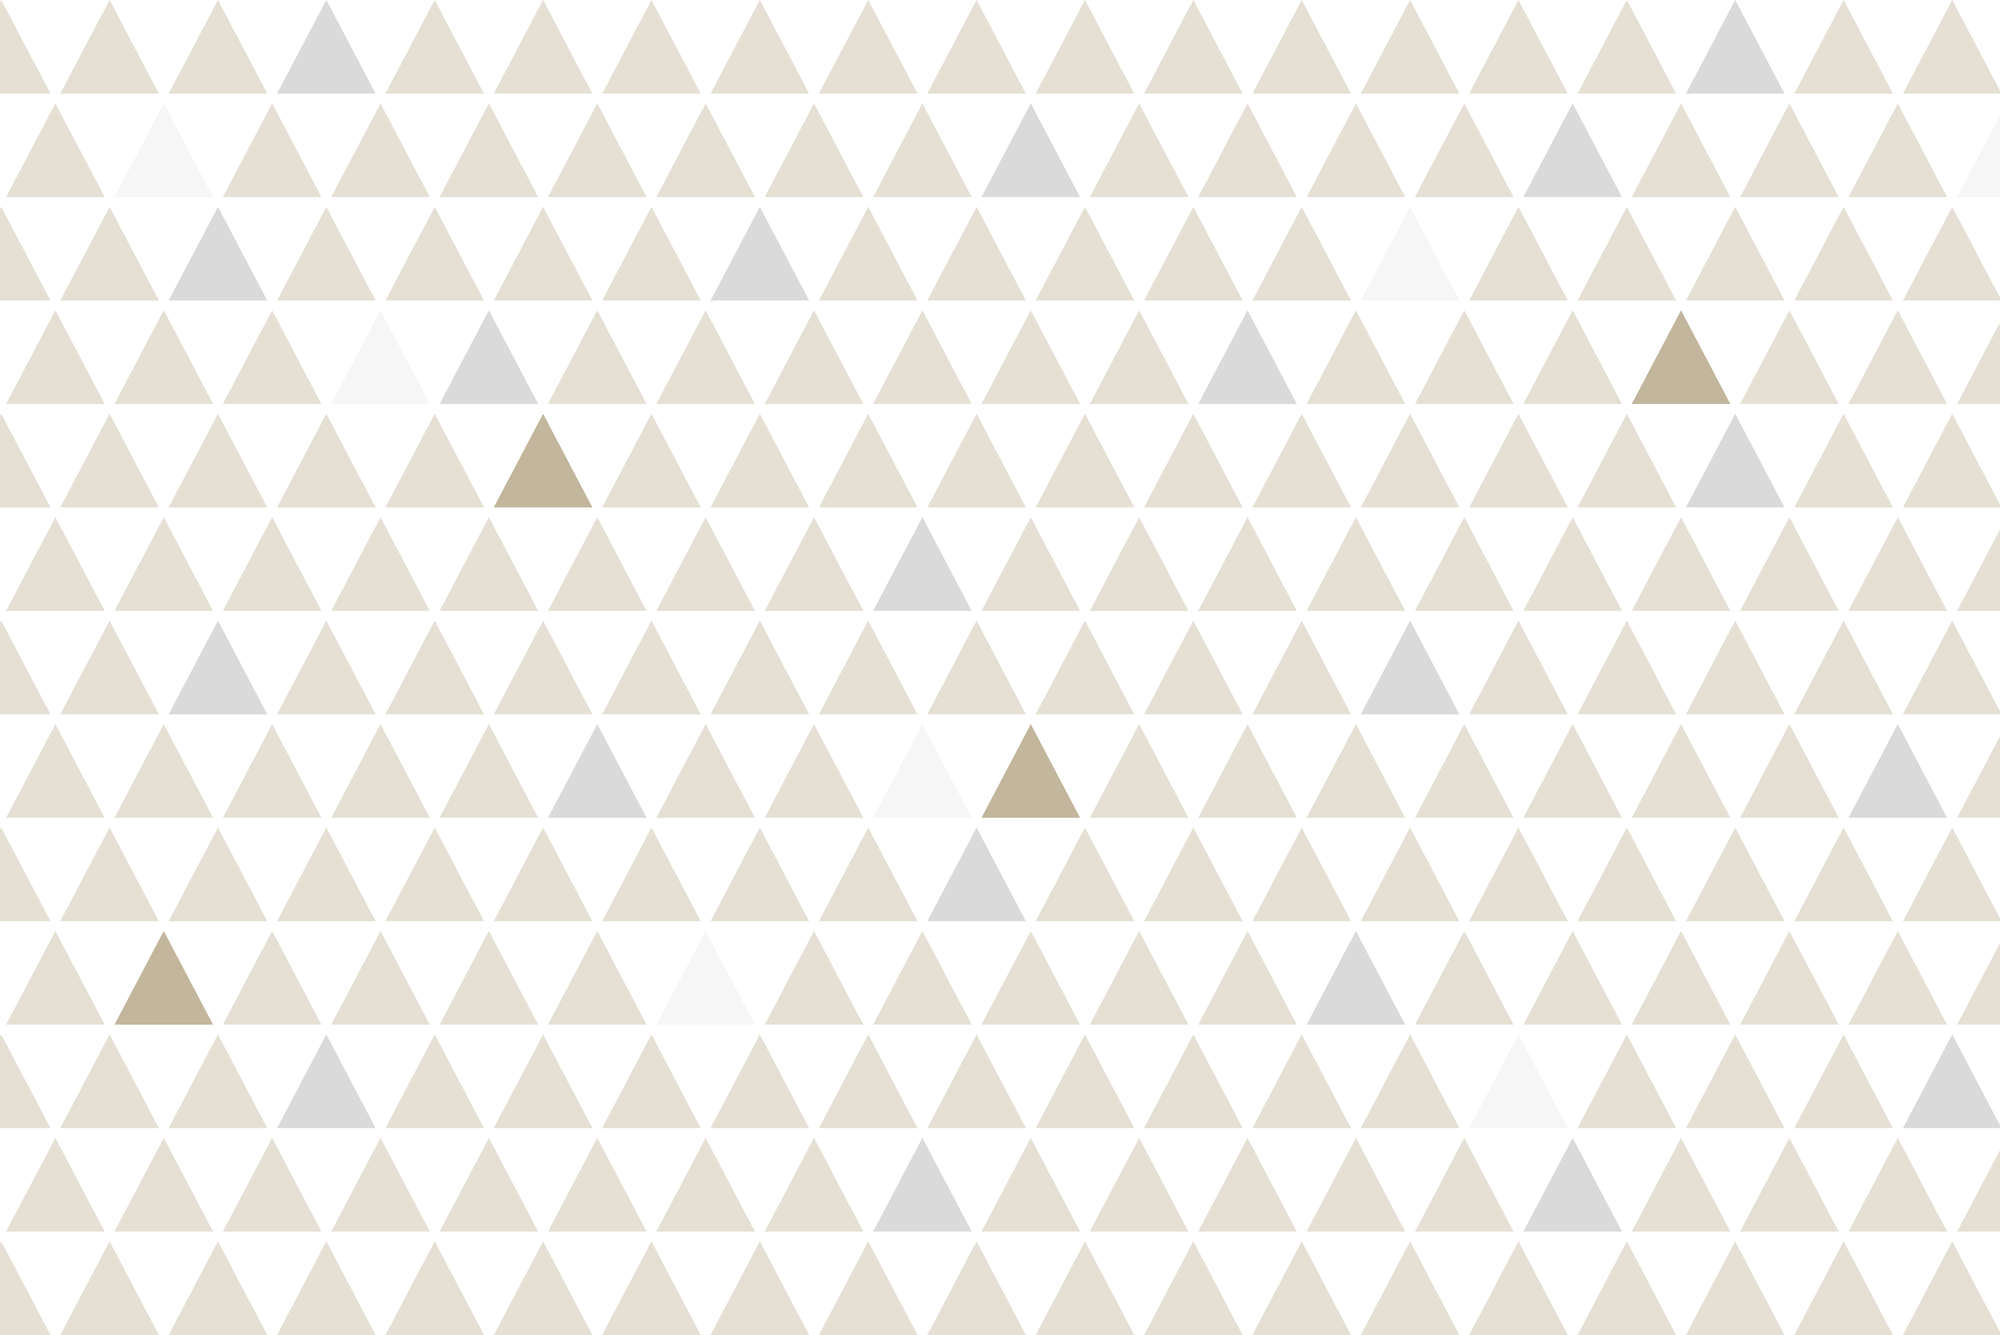             Design wall mural small triangles yellow on structural non-woven
        